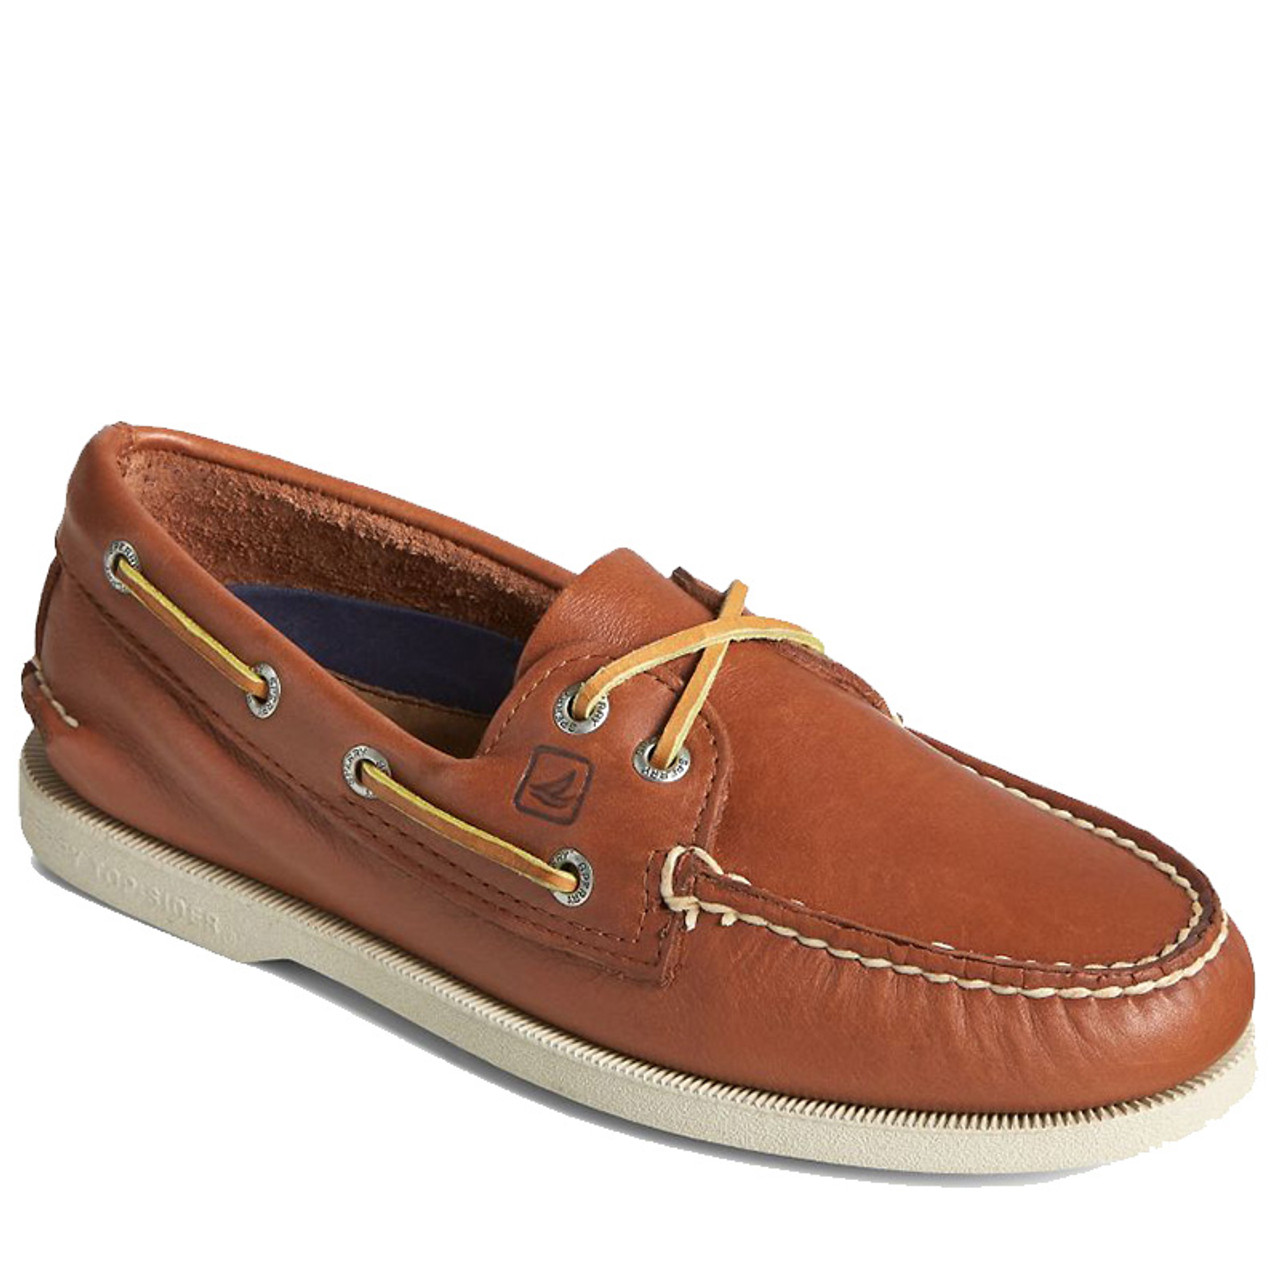 Sperry 0532002 AUTHENTIC ORIGINAL Boat Shoes - Family Footwear Center